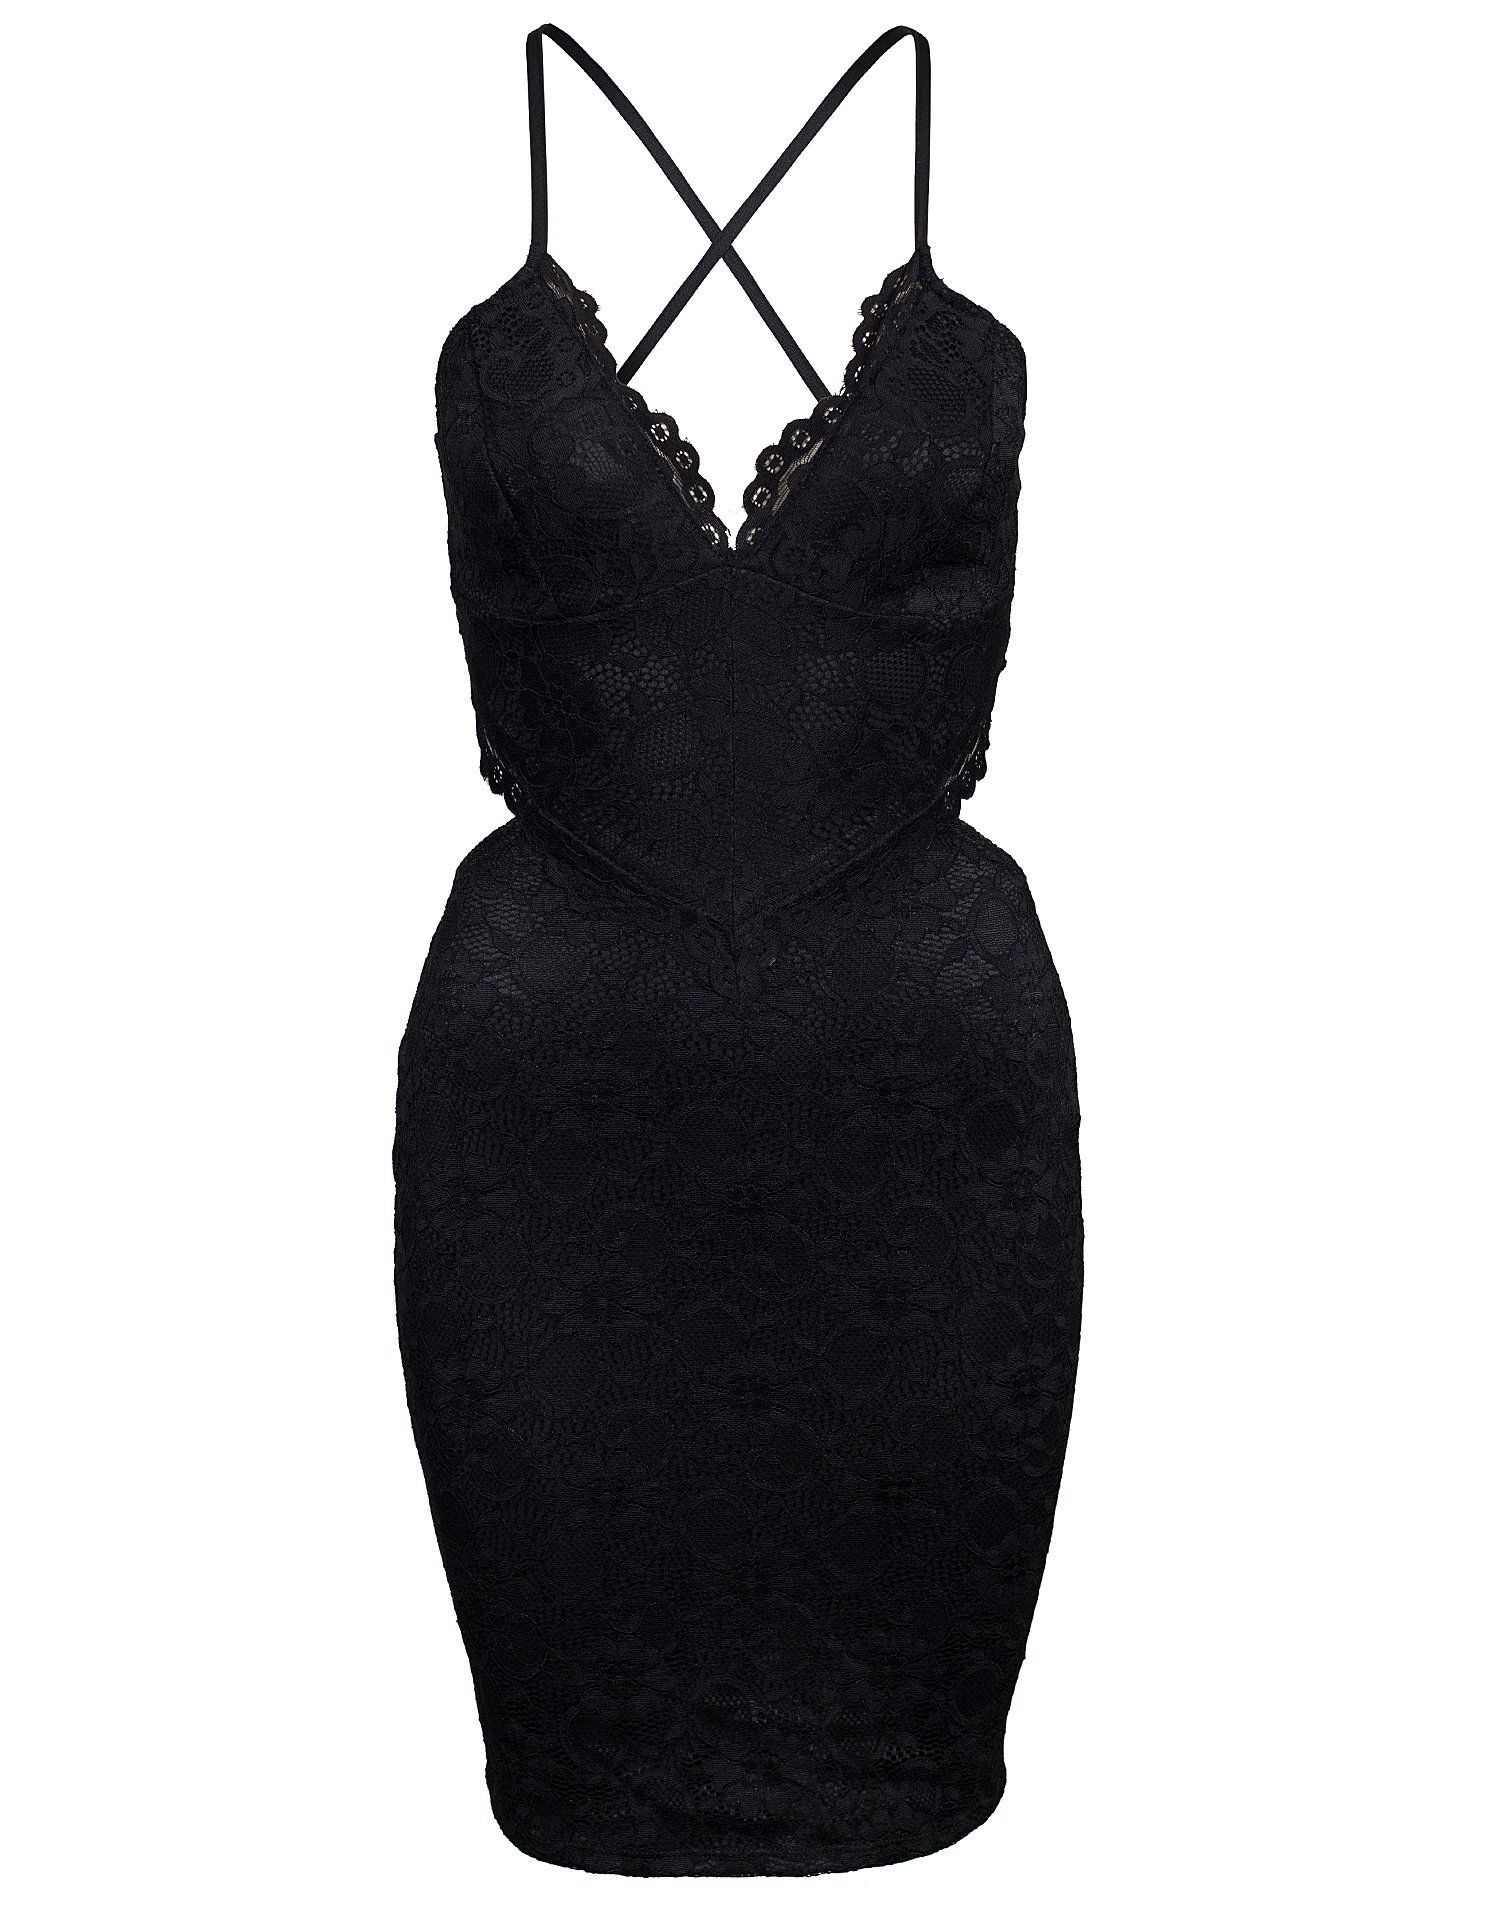 Lace Cut Out Dress - Nly One - Black - Party Dresses - Clothing - Women ...